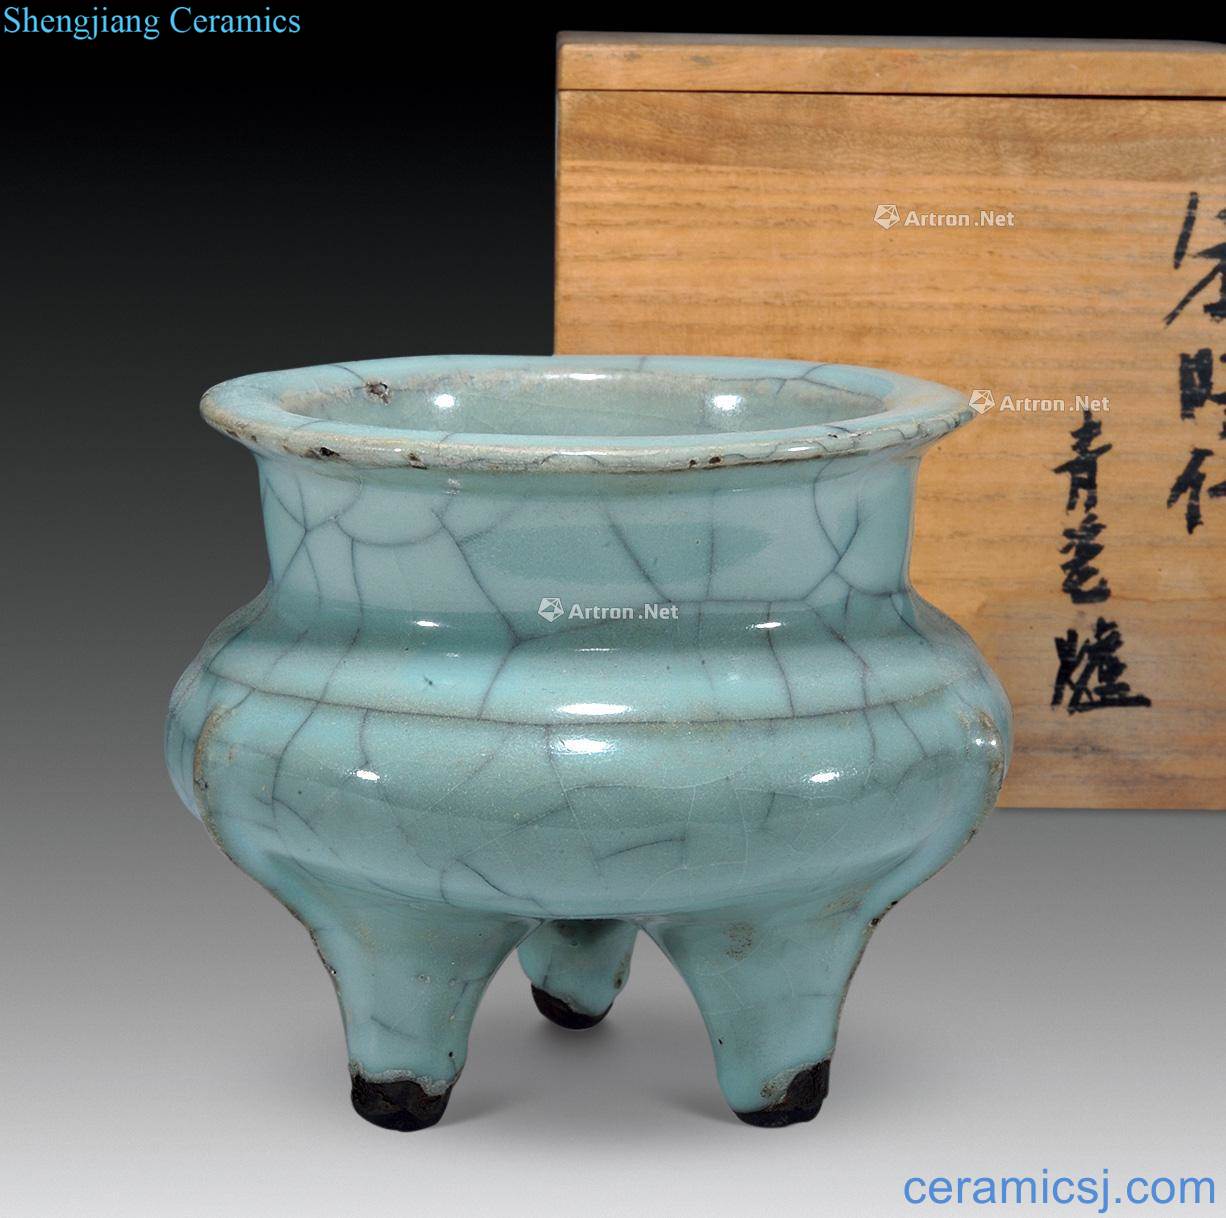 The southern song dynasty officer glaze furnace with three legs